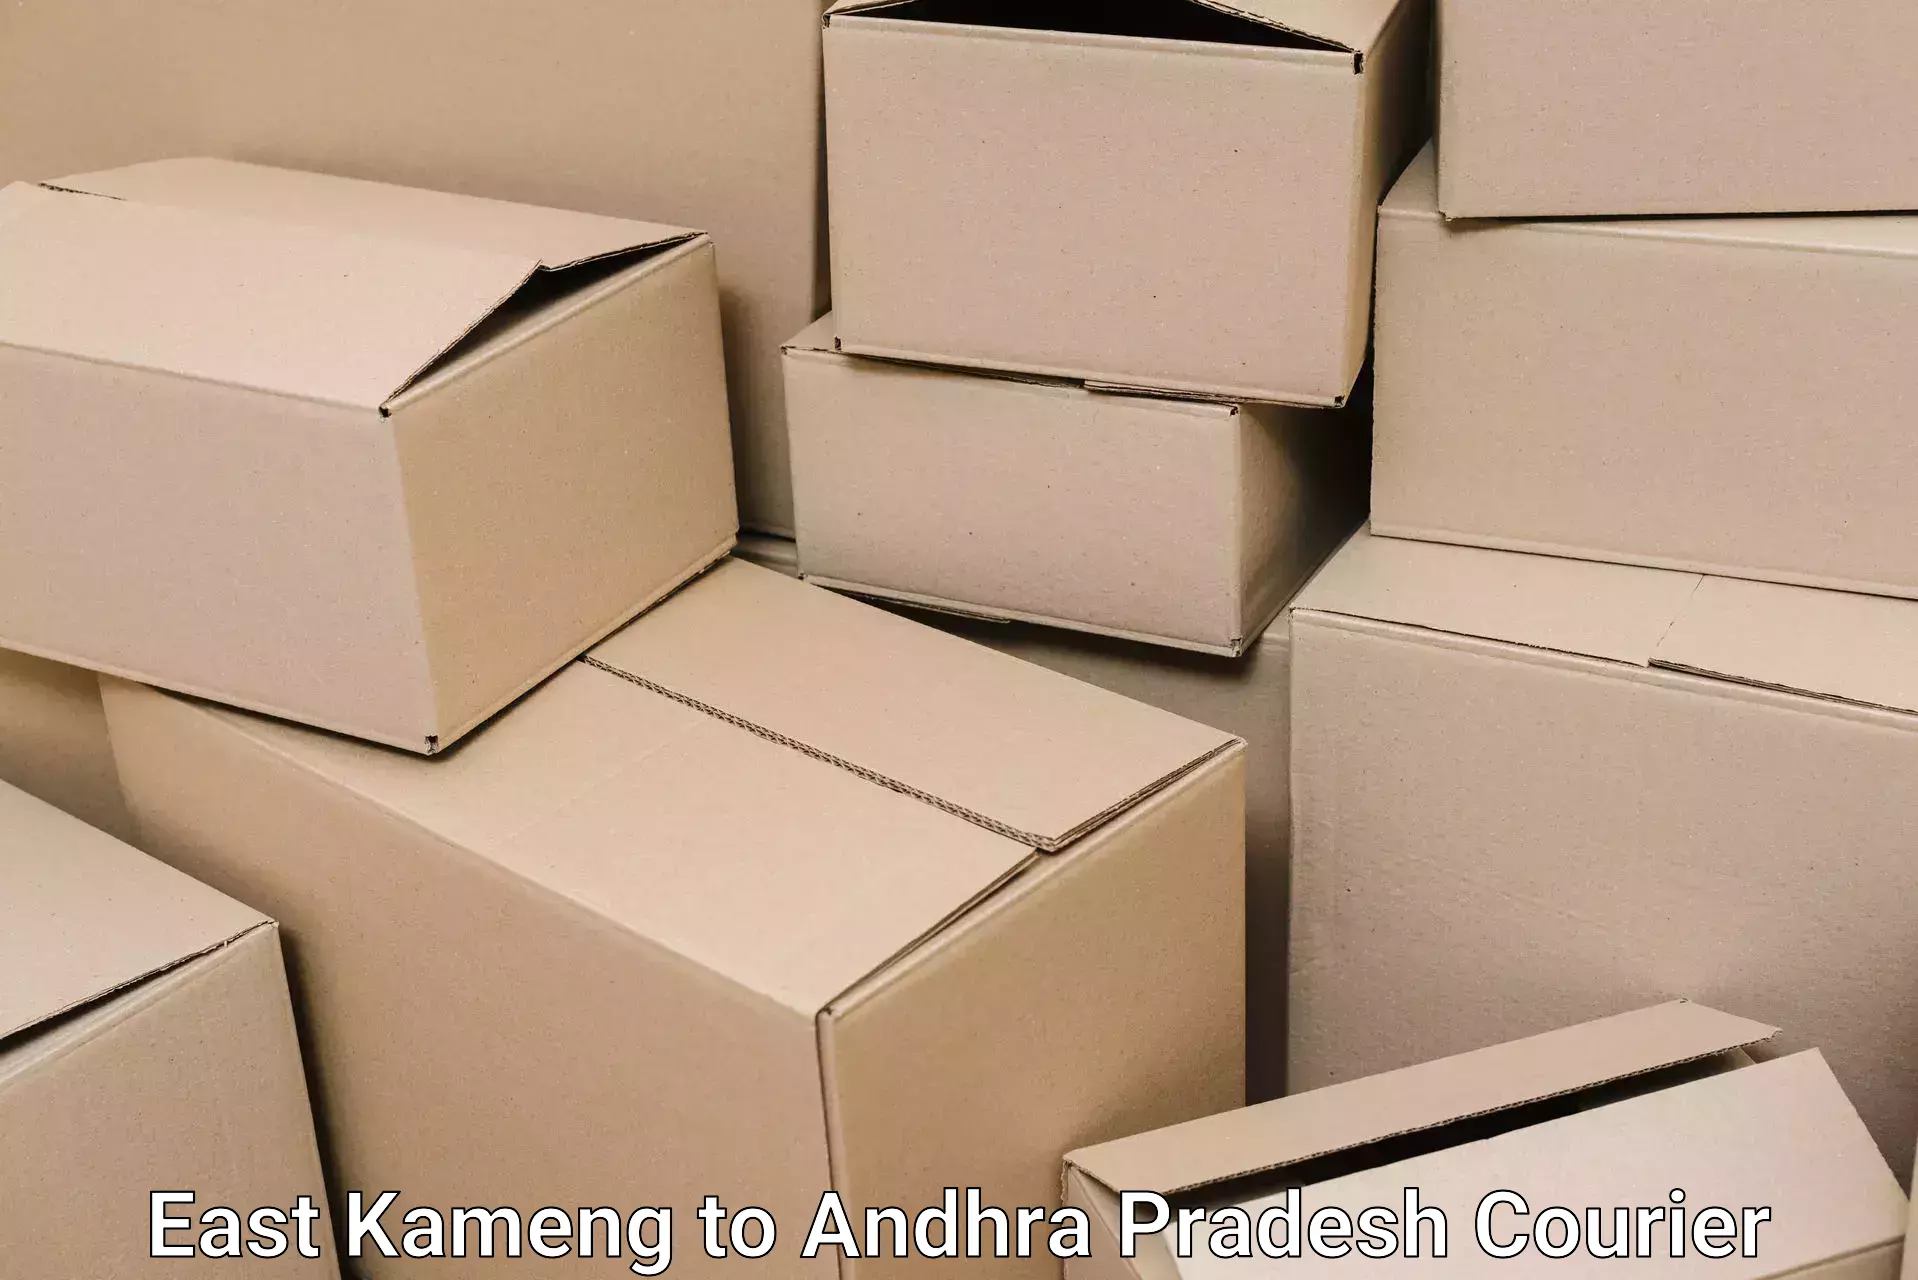 Cost-effective moving options East Kameng to Dhone